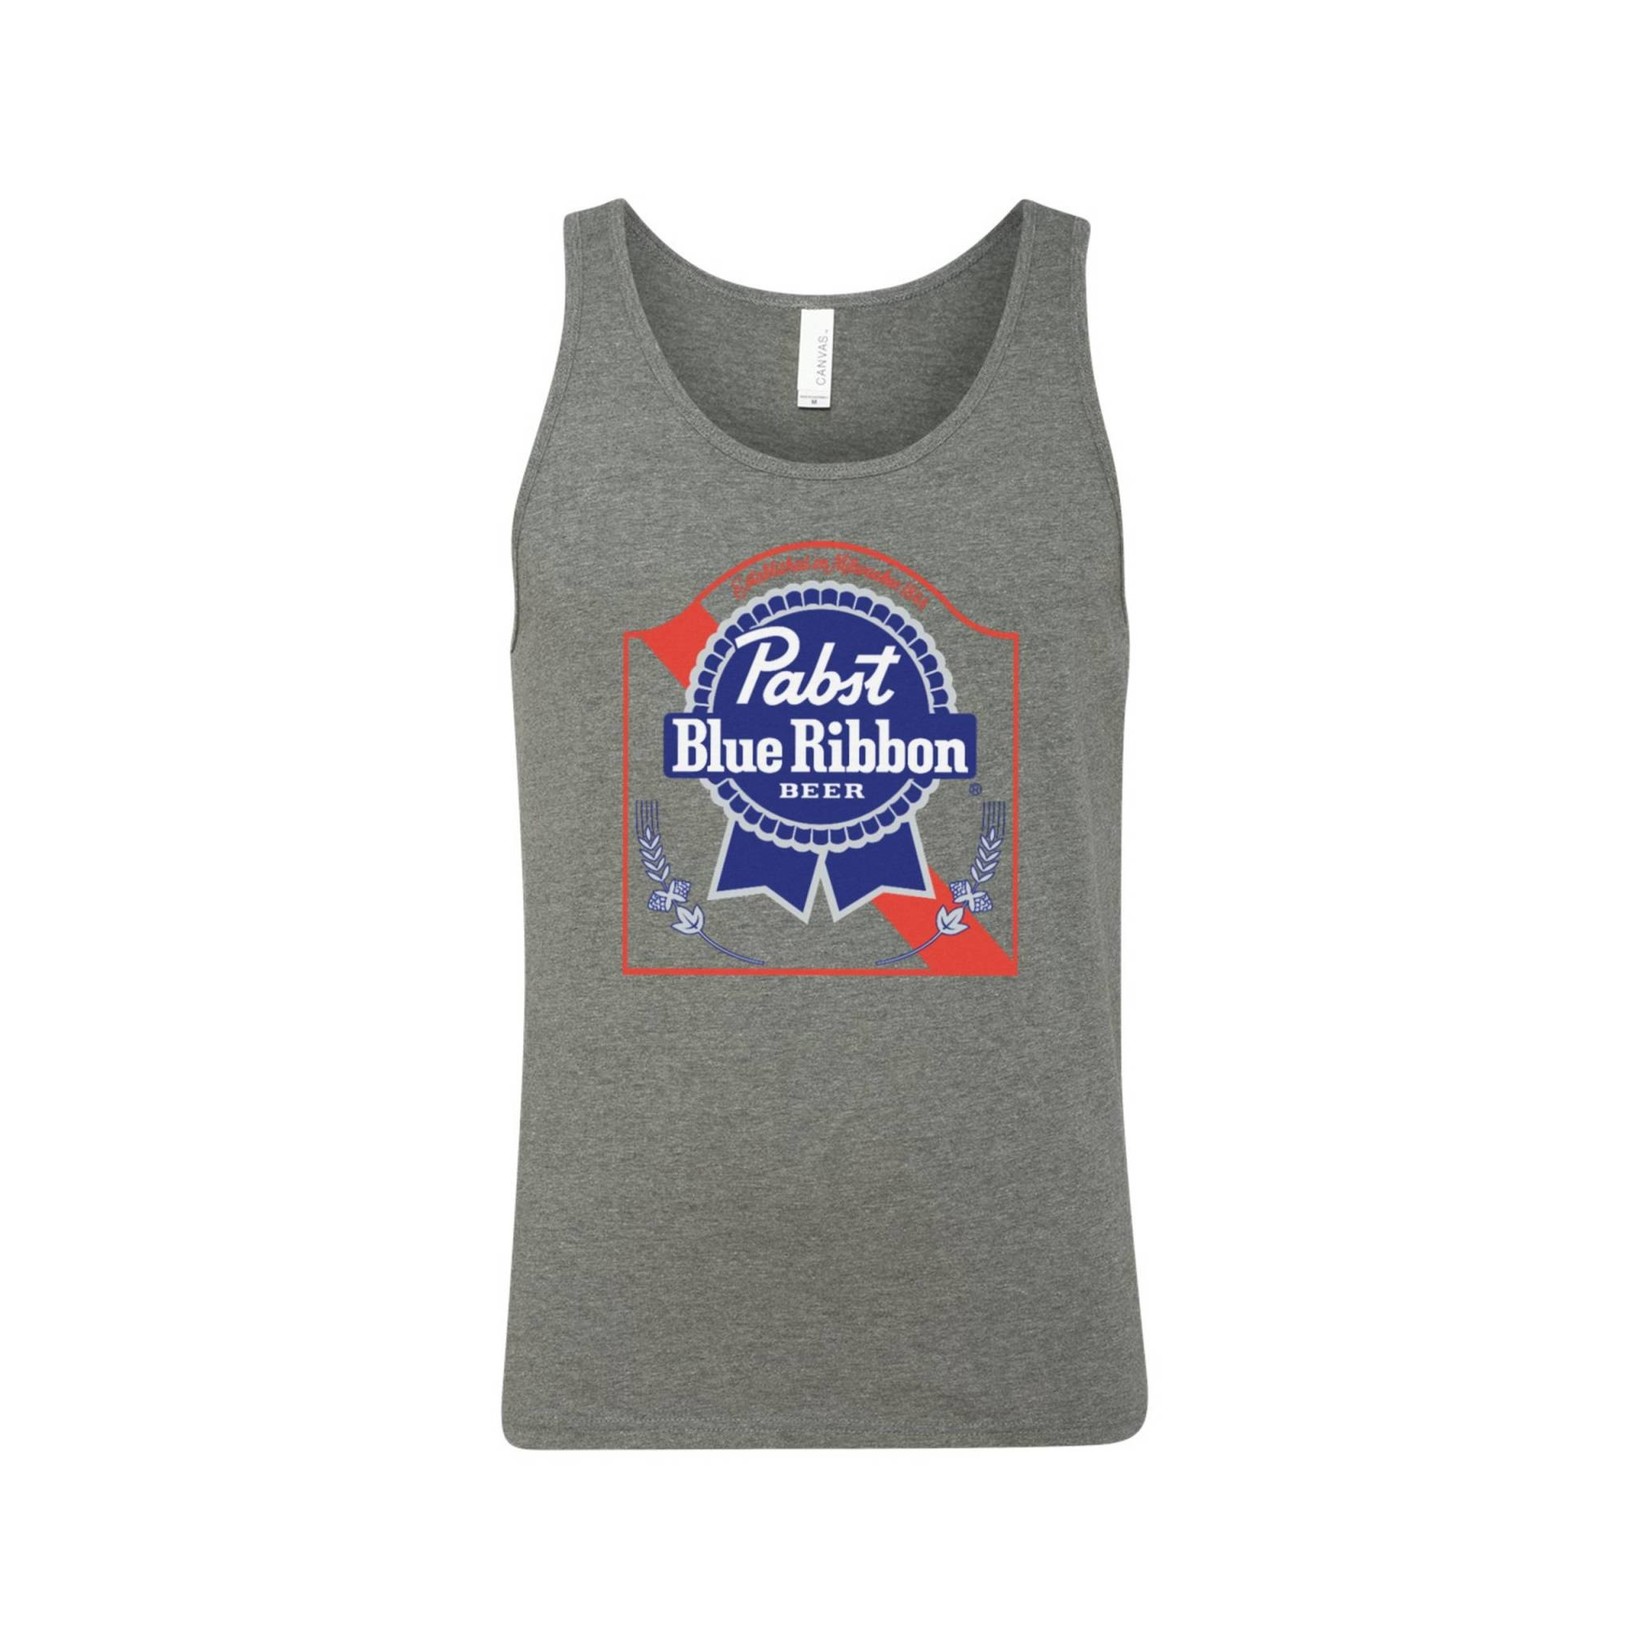 Pabst Pabst Grey Arch Tank